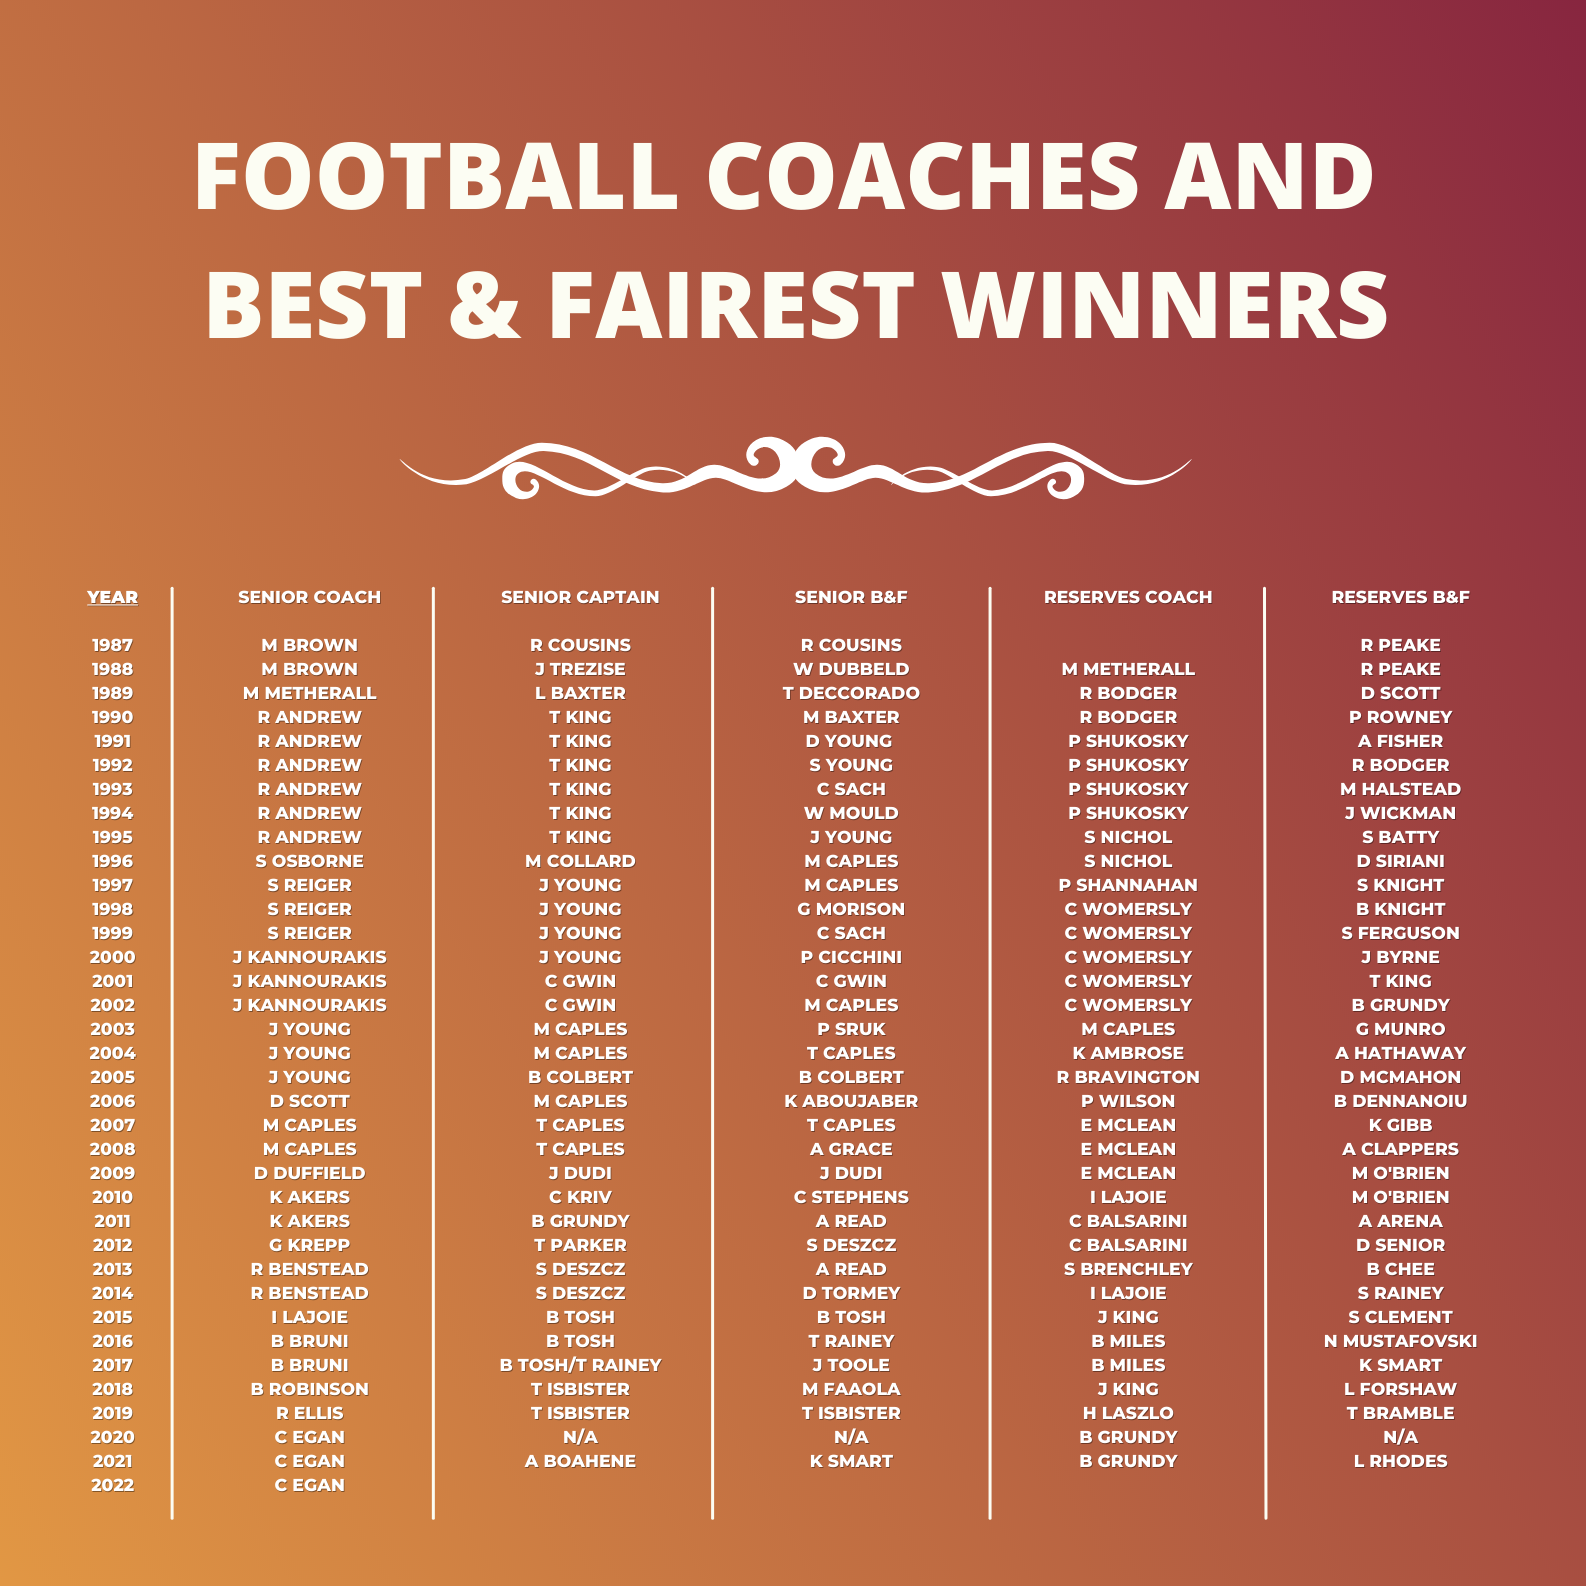 Football Coaches and Best & Fairest winners